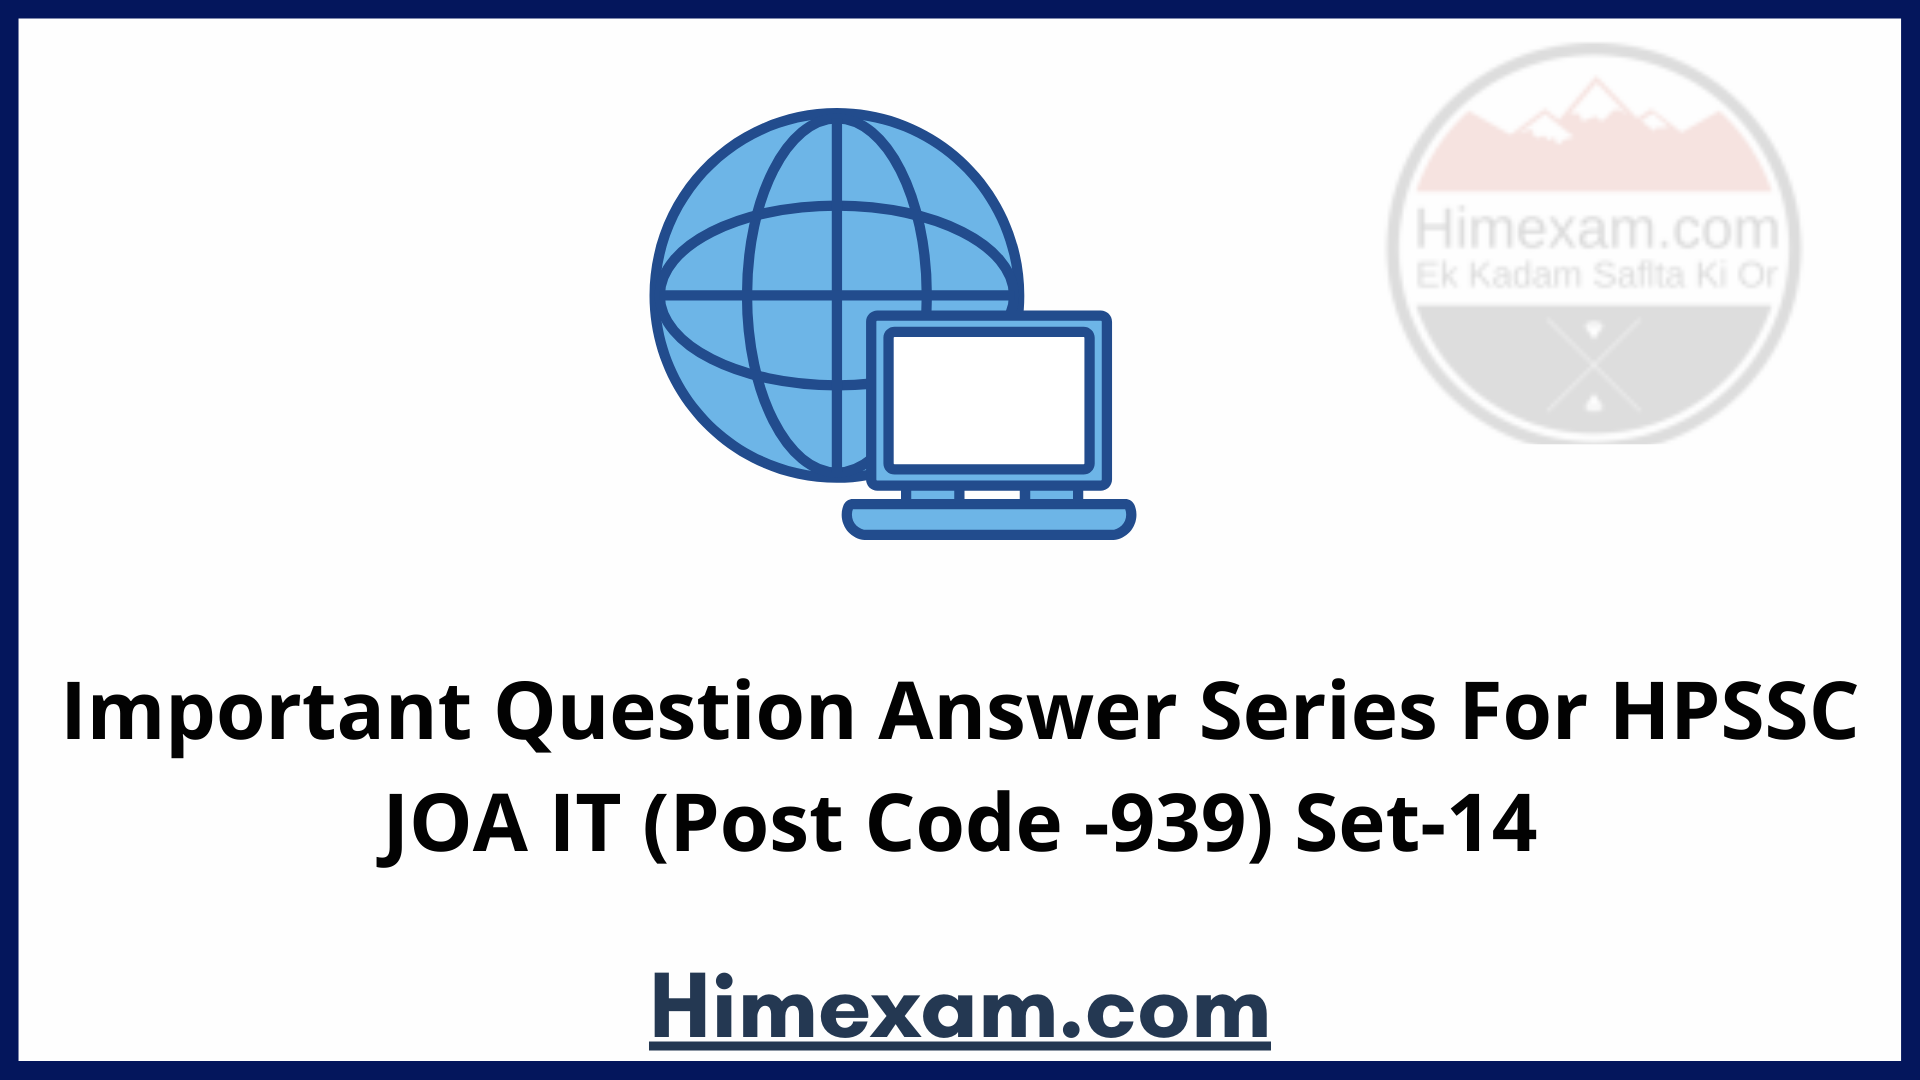 Important Question Answer Series For HPSSC JOA IT (Post Code -939) Set-14